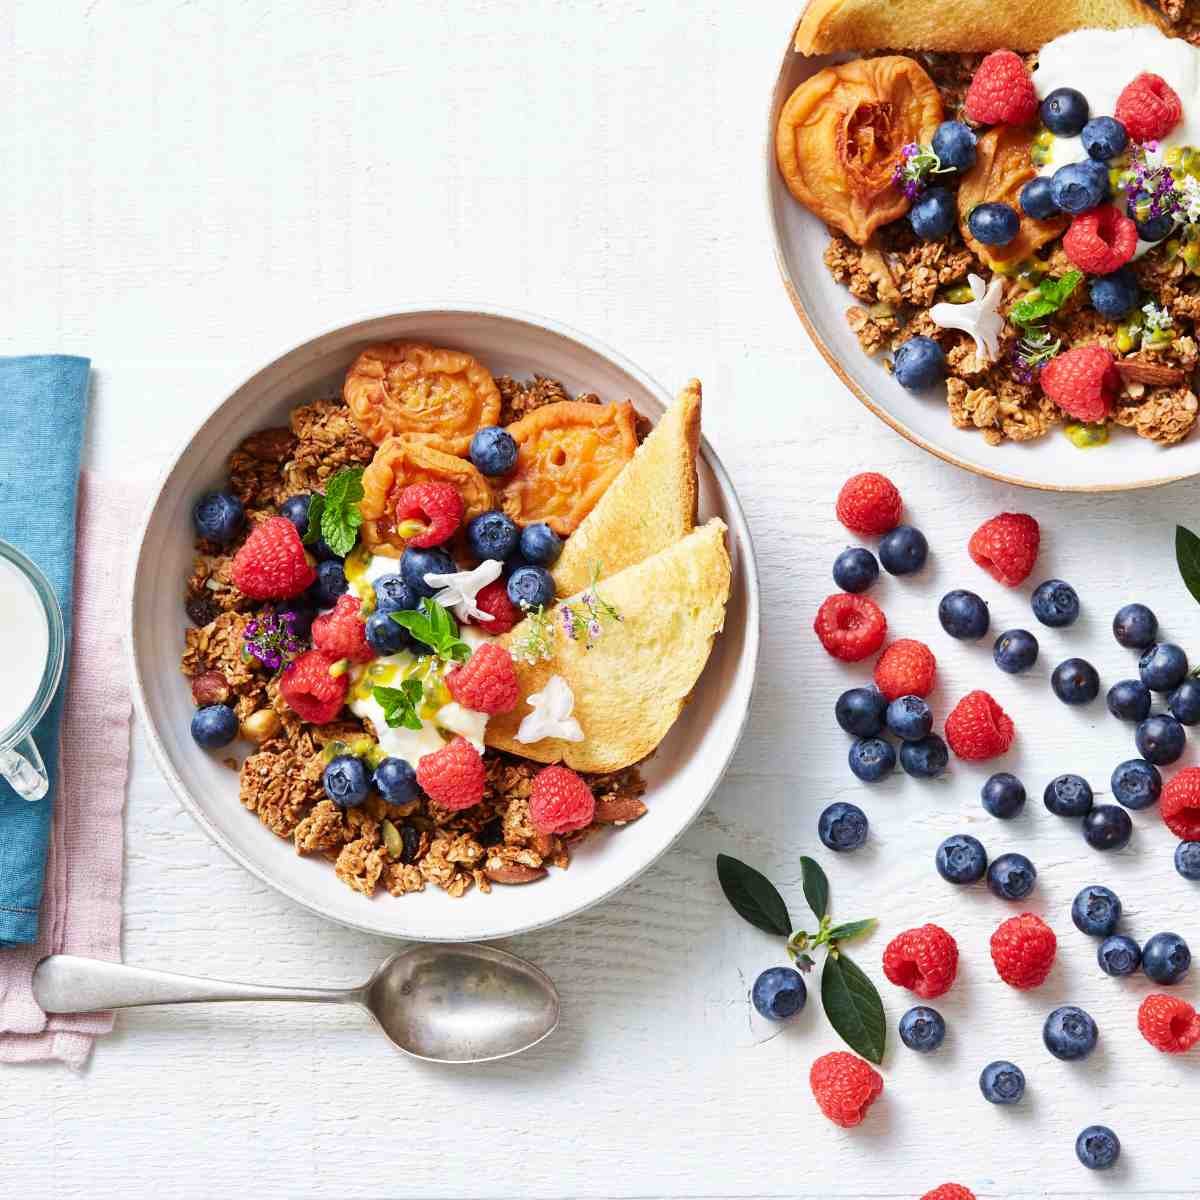 Two bowls of granola topped with berries and edible flowers with brioche bread on the side of the bowl.